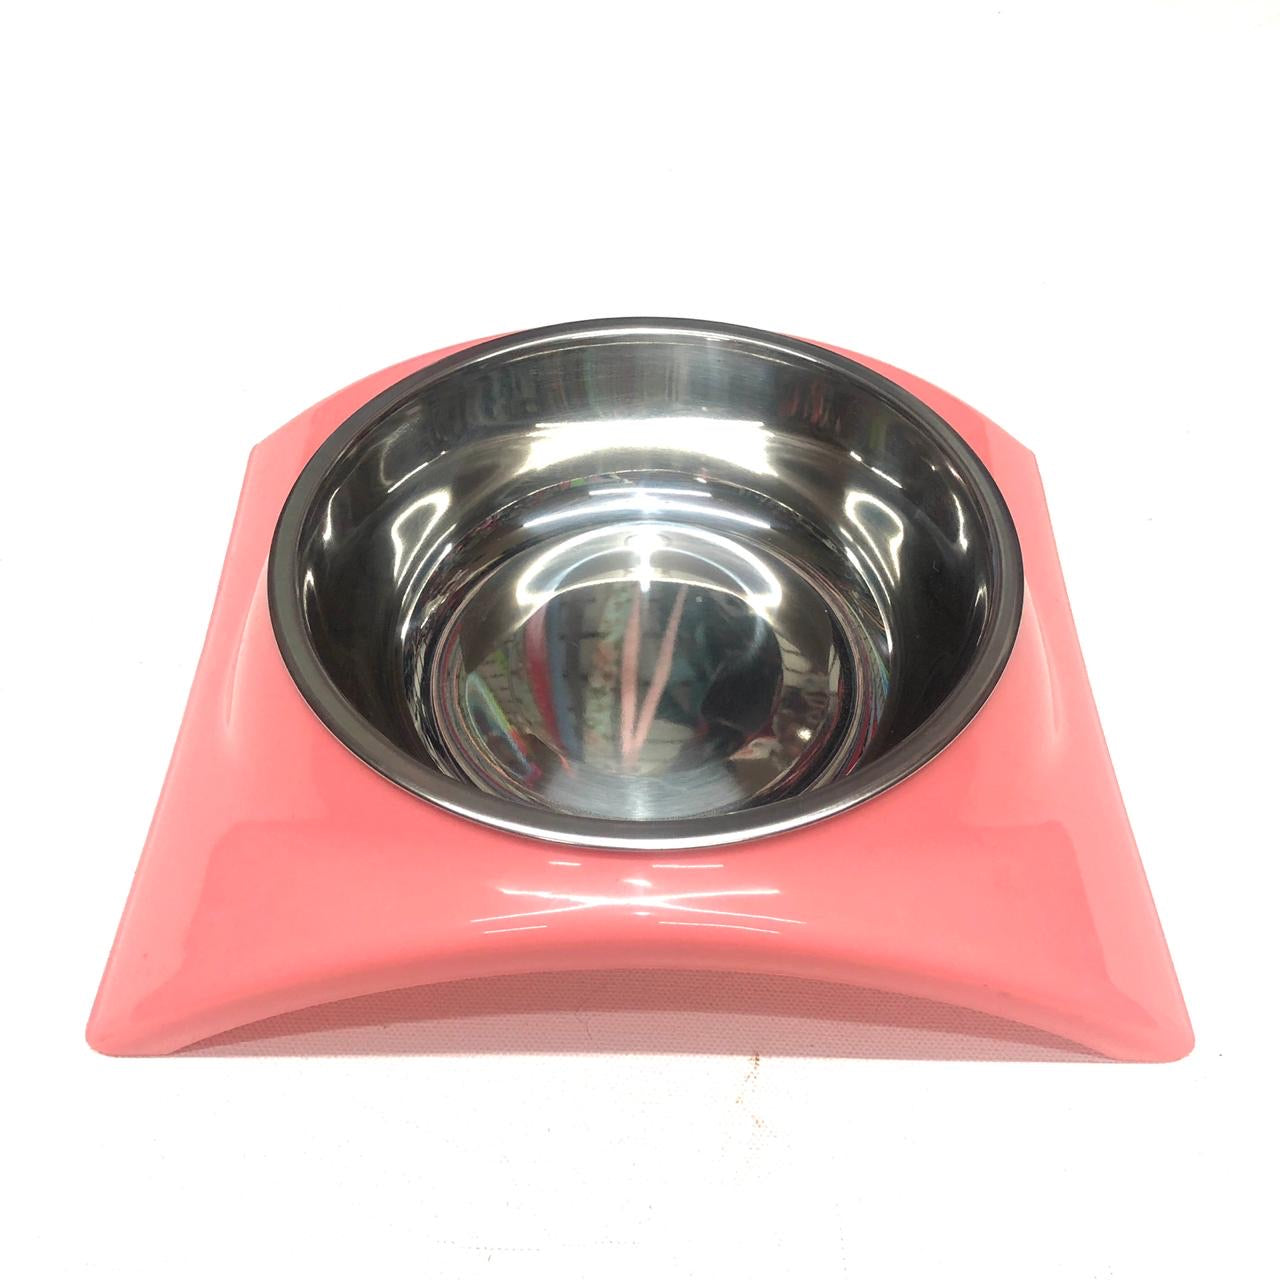 Steel feeder with plastic base